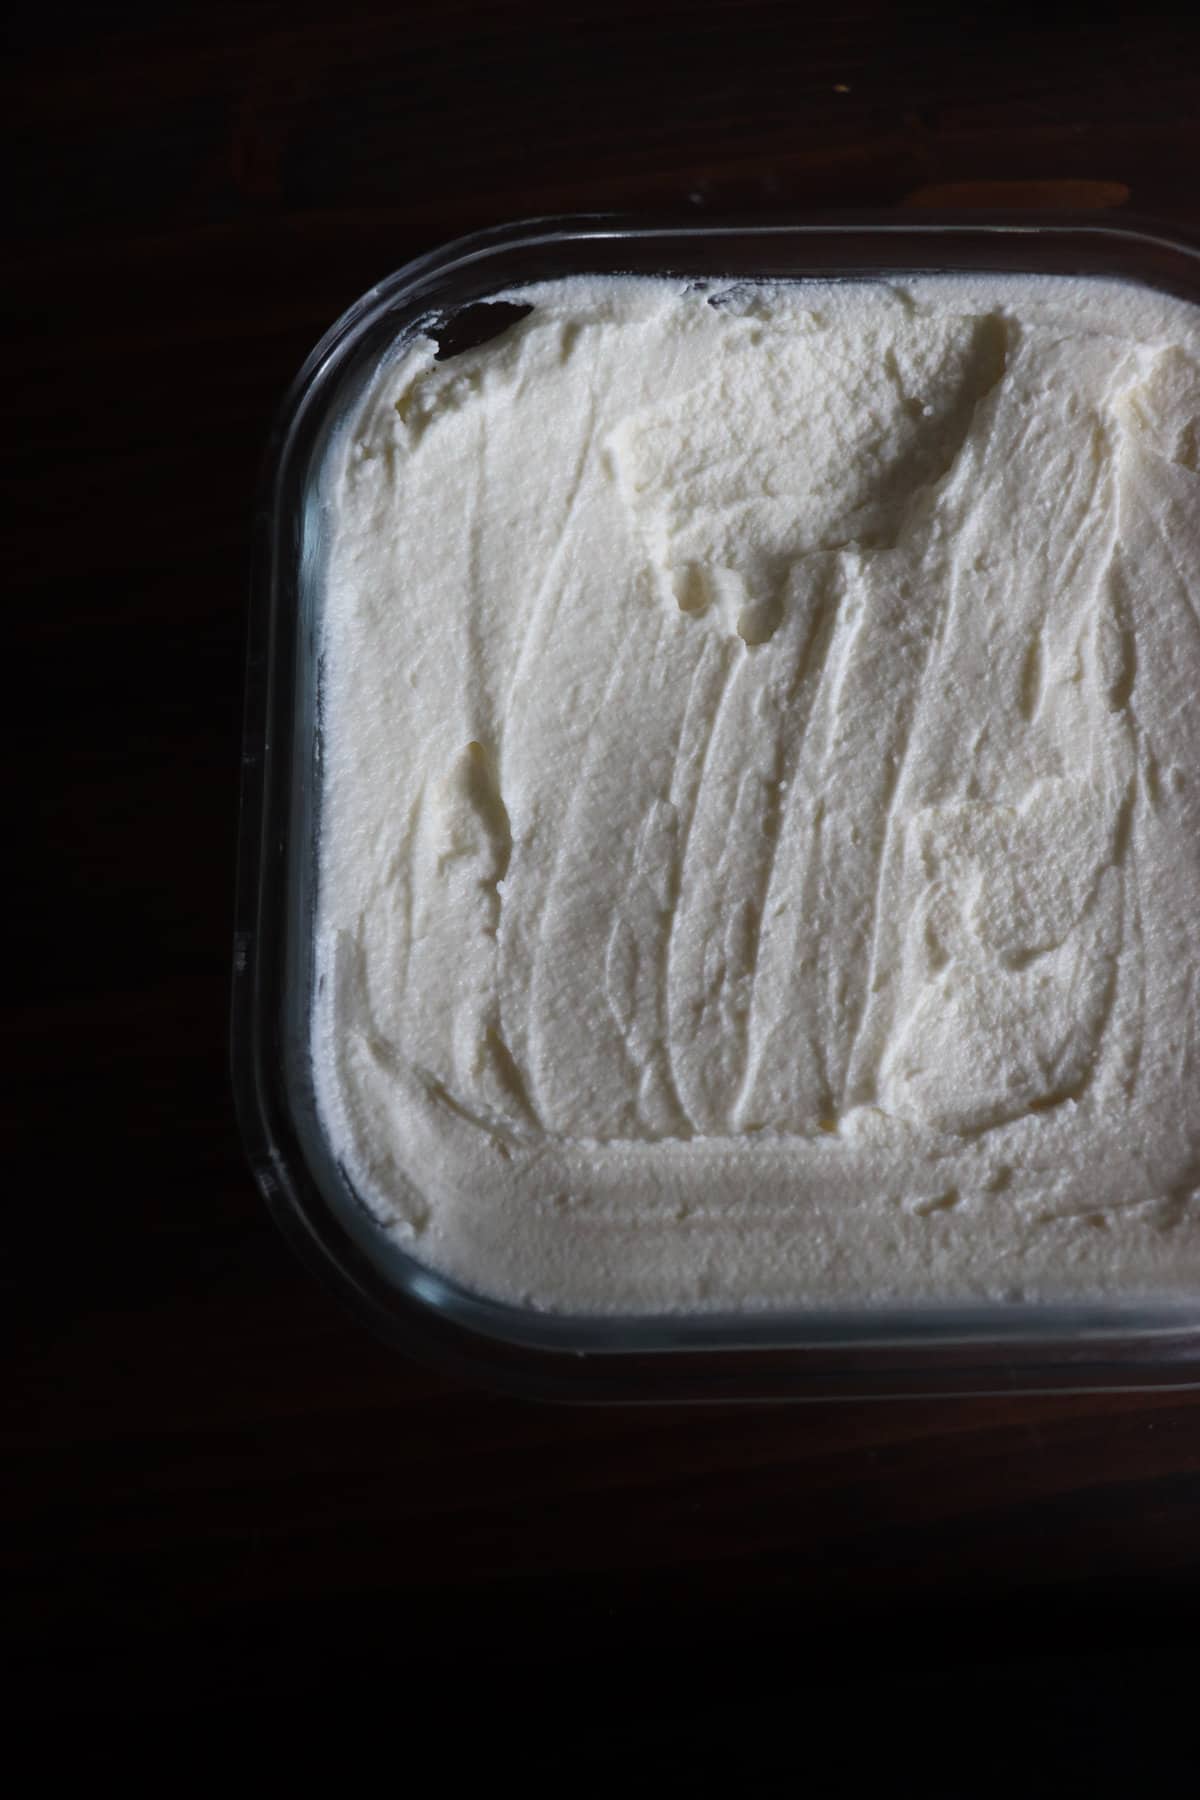 creamy homemade cream cheese in a glass container